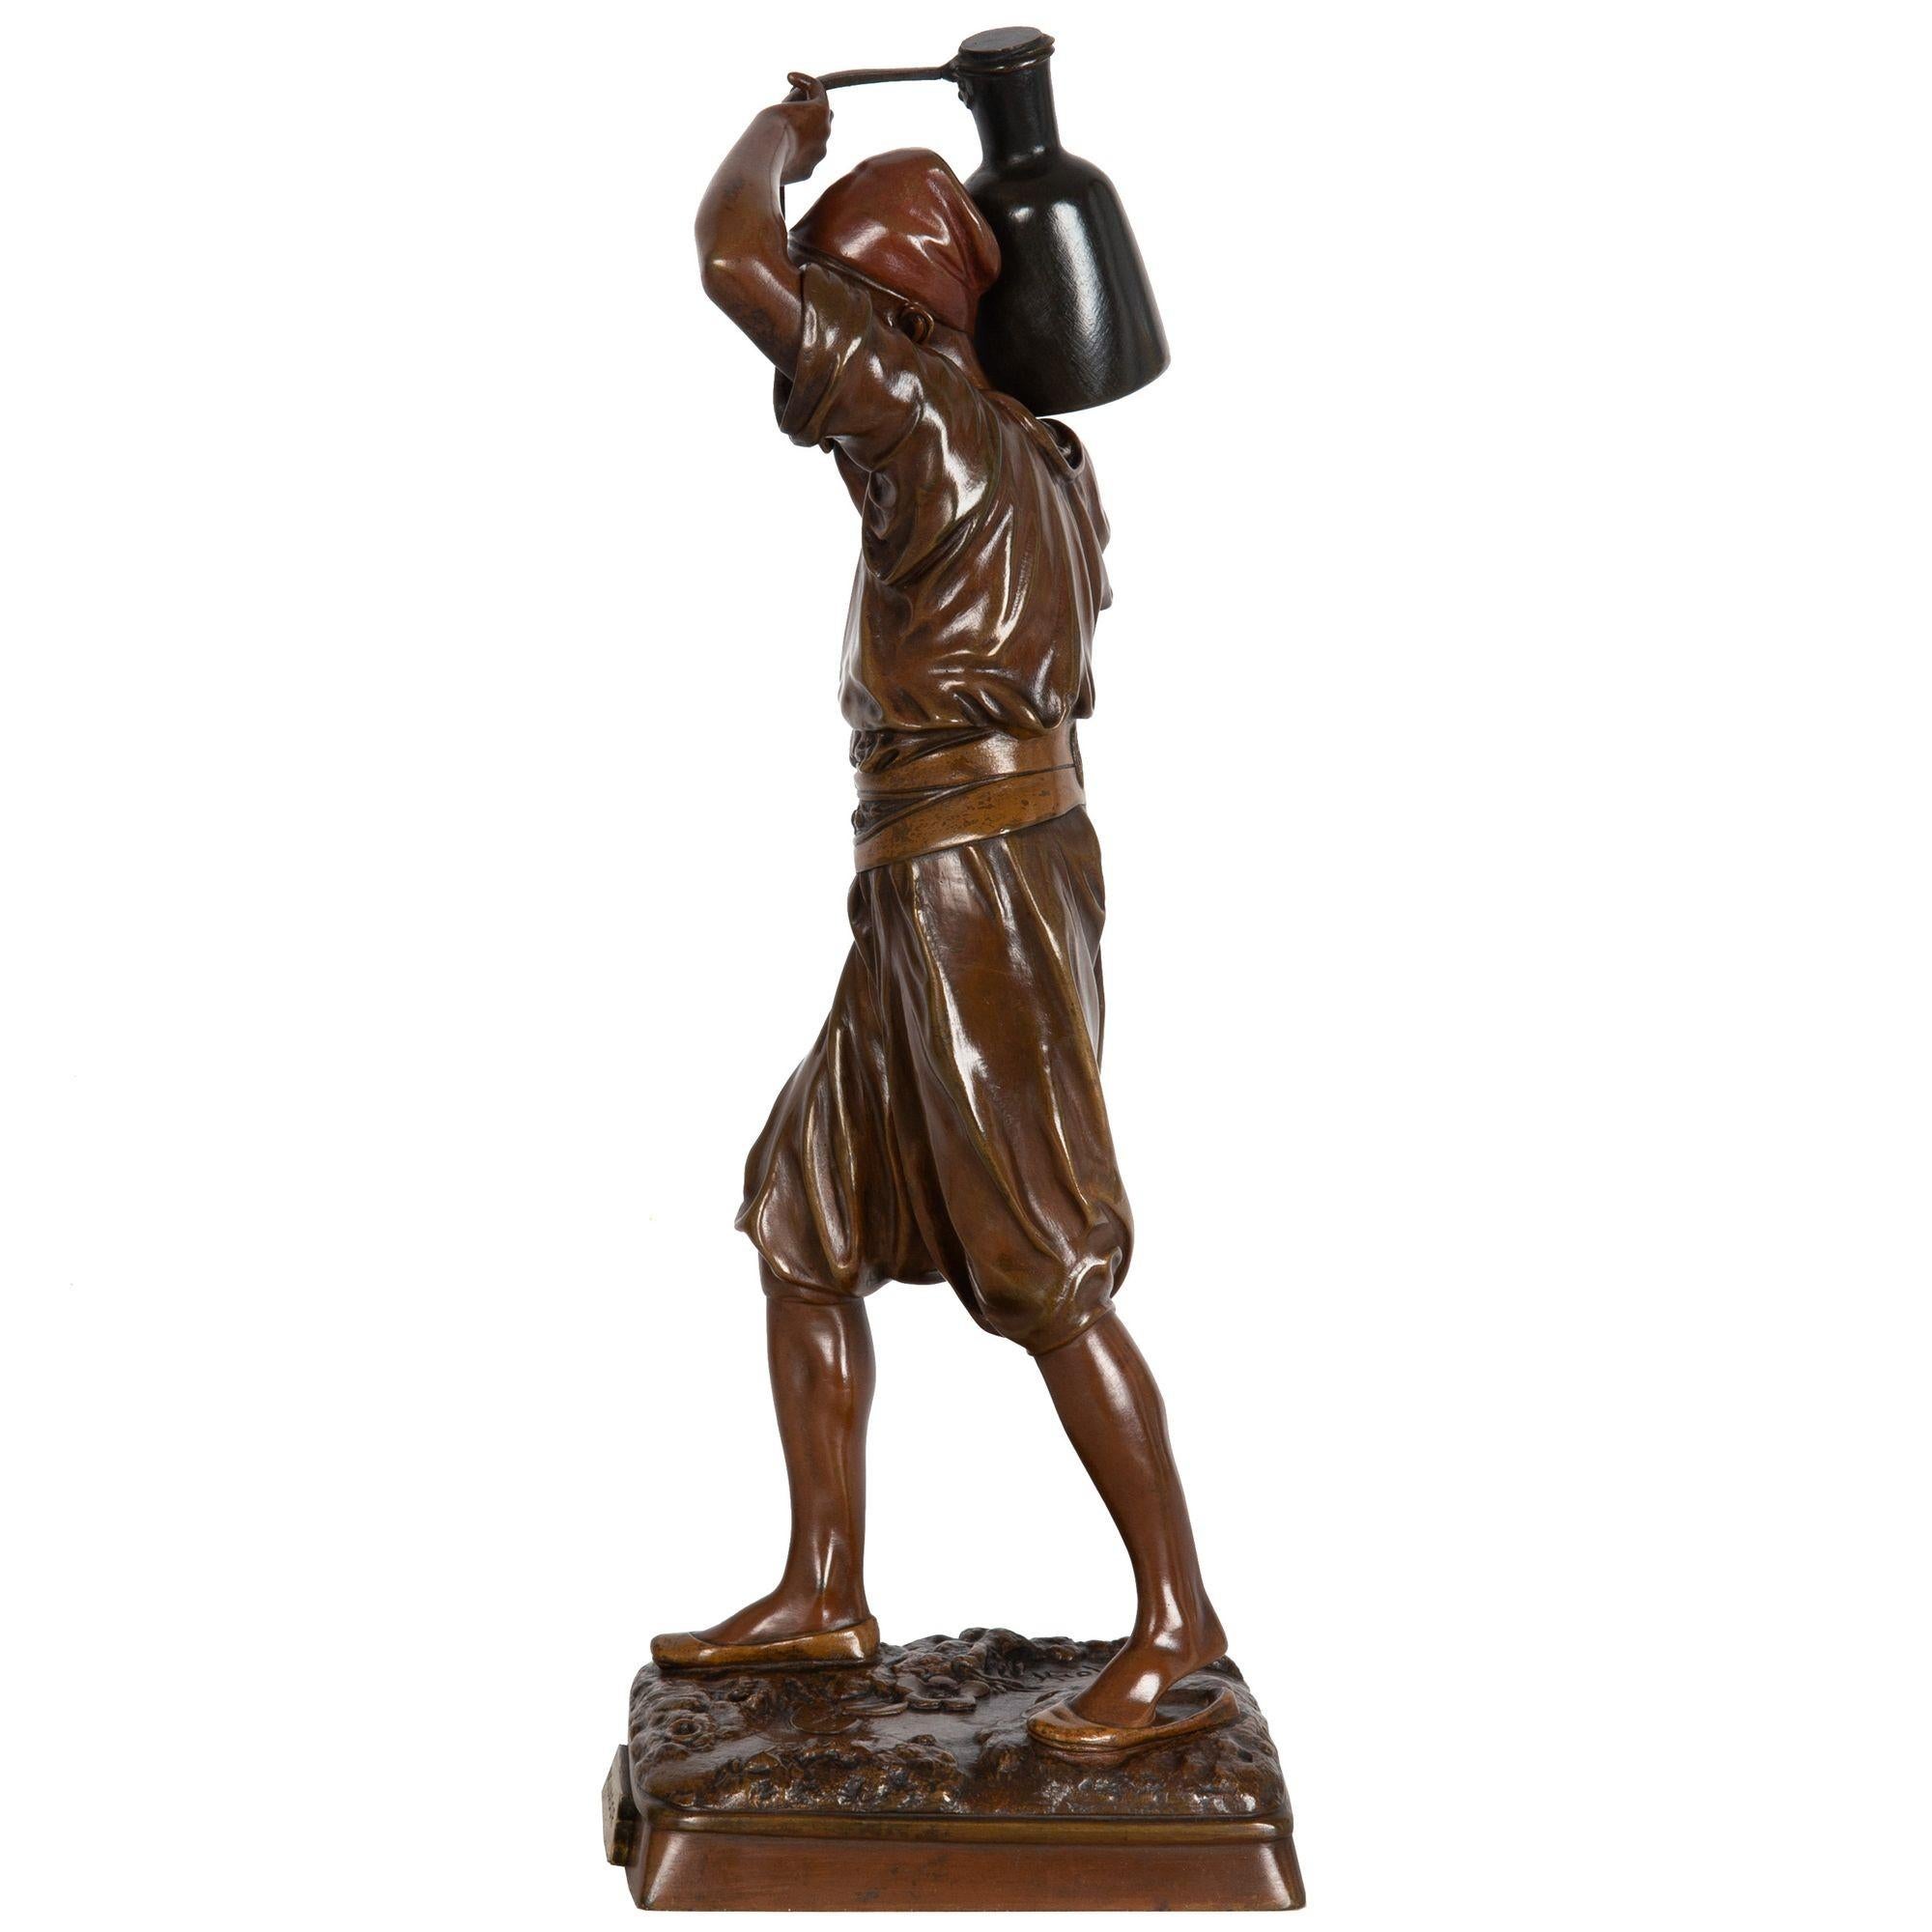 20th Century French Orientalist Bronze Sculpture of Water Carrier by Louis Hiolin For Sale